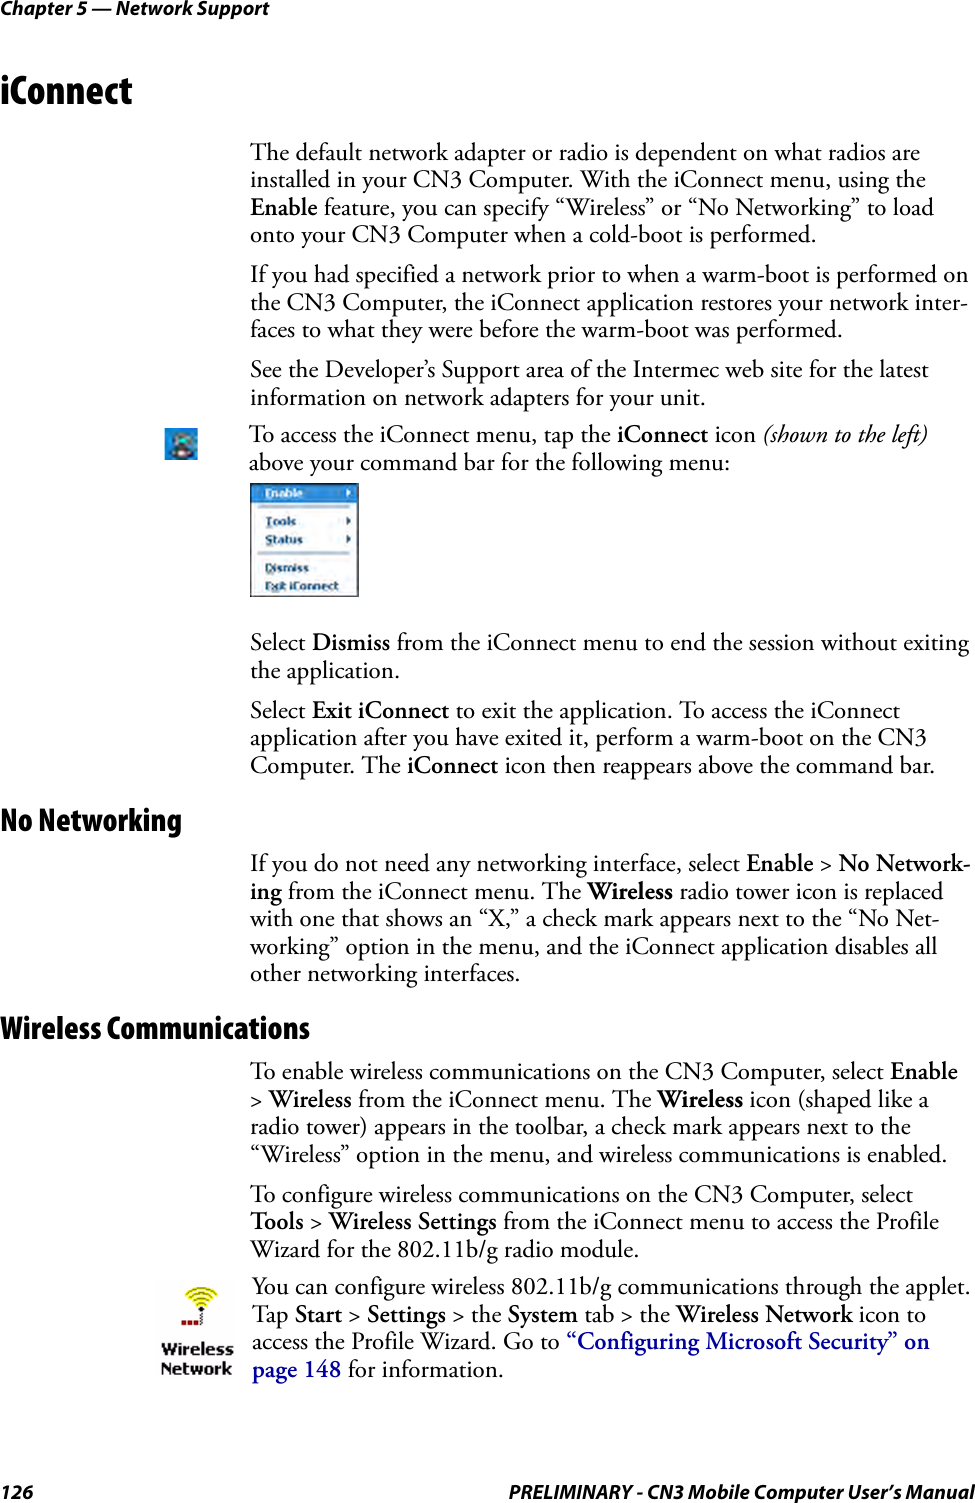 Chapter 5 — Network Support126 PRELIMINARY - CN3 Mobile Computer User’s ManualiConnectThe default network adapter or radio is dependent on what radios are installed in your CN3 Computer. With the iConnect menu, using the Enable feature, you can specify “Wireless” or “No Networking” to load onto your CN3 Computer when a cold-boot is performed. If you had specified a network prior to when a warm-boot is performed on the CN3 Computer, the iConnect application restores your network inter-faces to what they were before the warm-boot was performed.See the Developer’s Support area of the Intermec web site for the latest information on network adapters for your unit.Select Dismiss from the iConnect menu to end the session without exiting the application.Select Exit iConnect to exit the application. To access the iConnect application after you have exited it, perform a warm-boot on the CN3 Computer. The iConnect icon then reappears above the command bar.No NetworkingIf you do not need any networking interface, select Enable &gt; No Network-ing from the iConnect menu. The Wireless radio tower icon is replaced with one that shows an “X,” a check mark appears next to the “No Net-working” option in the menu, and the iConnect application disables all other networking interfaces.Wireless CommunicationsTo enable wireless communications on the CN3 Computer, select Enable &gt; Wireless from the iConnect menu. The Wireless icon (shaped like a radio tower) appears in the toolbar, a check mark appears next to the “Wireless” option in the menu, and wireless communications is enabled.To configure wireless communications on the CN3 Computer, select Tools &gt; Wireless Settings from the iConnect menu to access the Profile Wizard for the 802.11b/g radio module.To access the iConnect menu, tap the iConnect icon (shown to the left) above your command bar for the following menu:You can configure wireless 802.11b/g communications through the applet. Tap  Start &gt; Settings &gt; the System tab &gt; the Wireless Network icon to access the Profile Wizard. Go to “Configuring Microsoft Security” on page 148 for information.